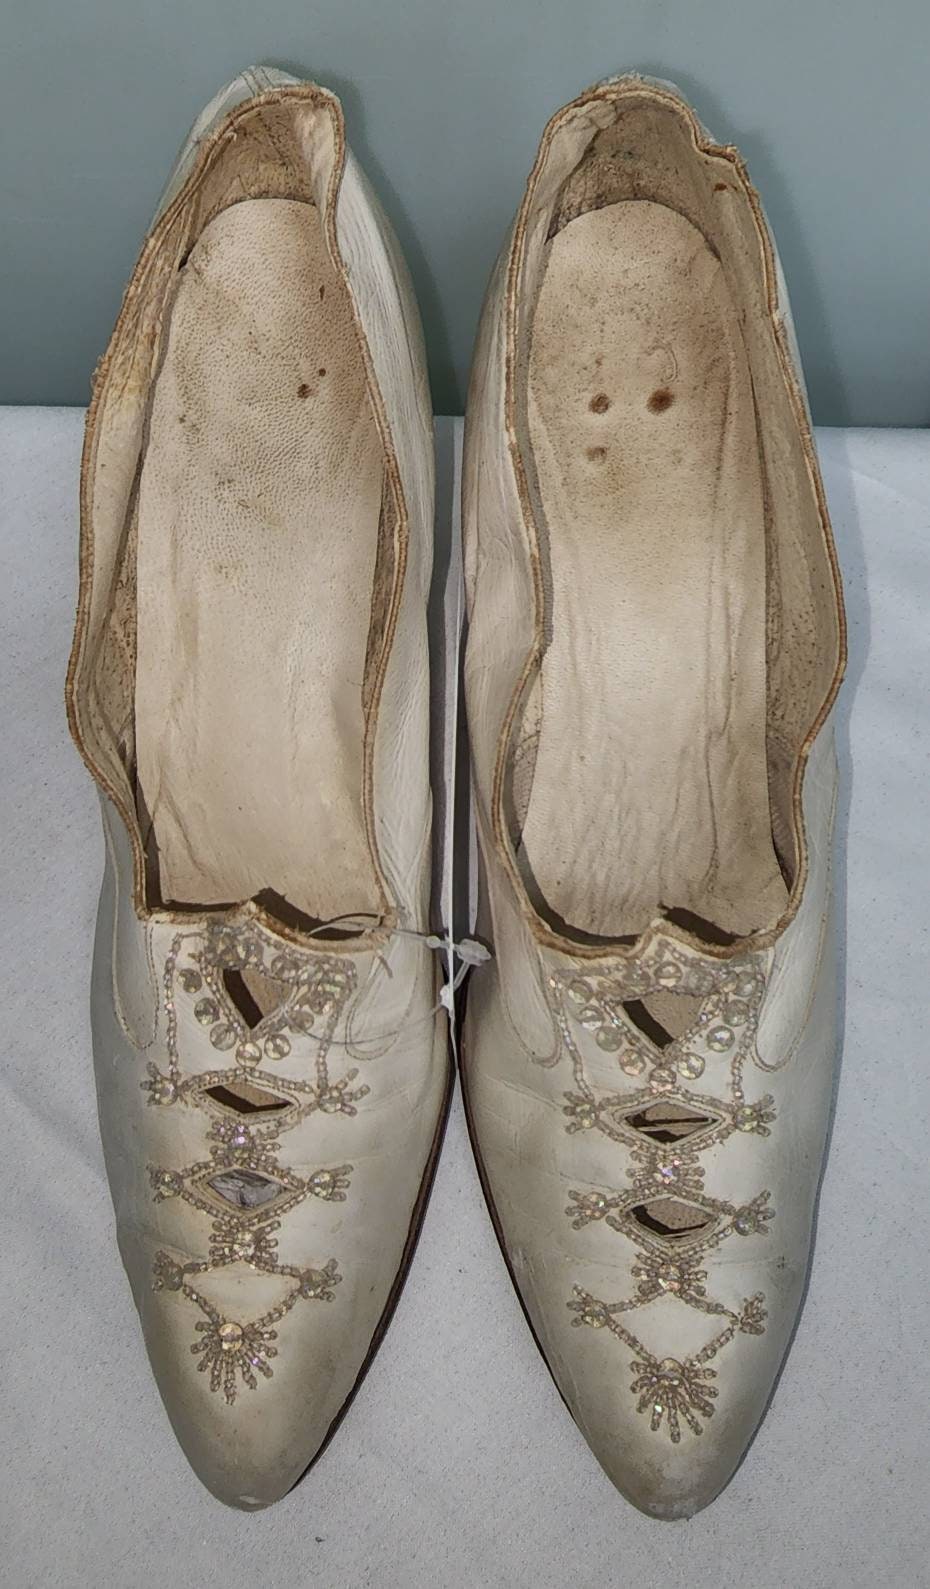 Antique Kidskin Shoes 1910s Cream Kidskin Beaded Pumps Open Cutouts Crystals Beads Low Heels Edwardian Wedding Shoes XS S